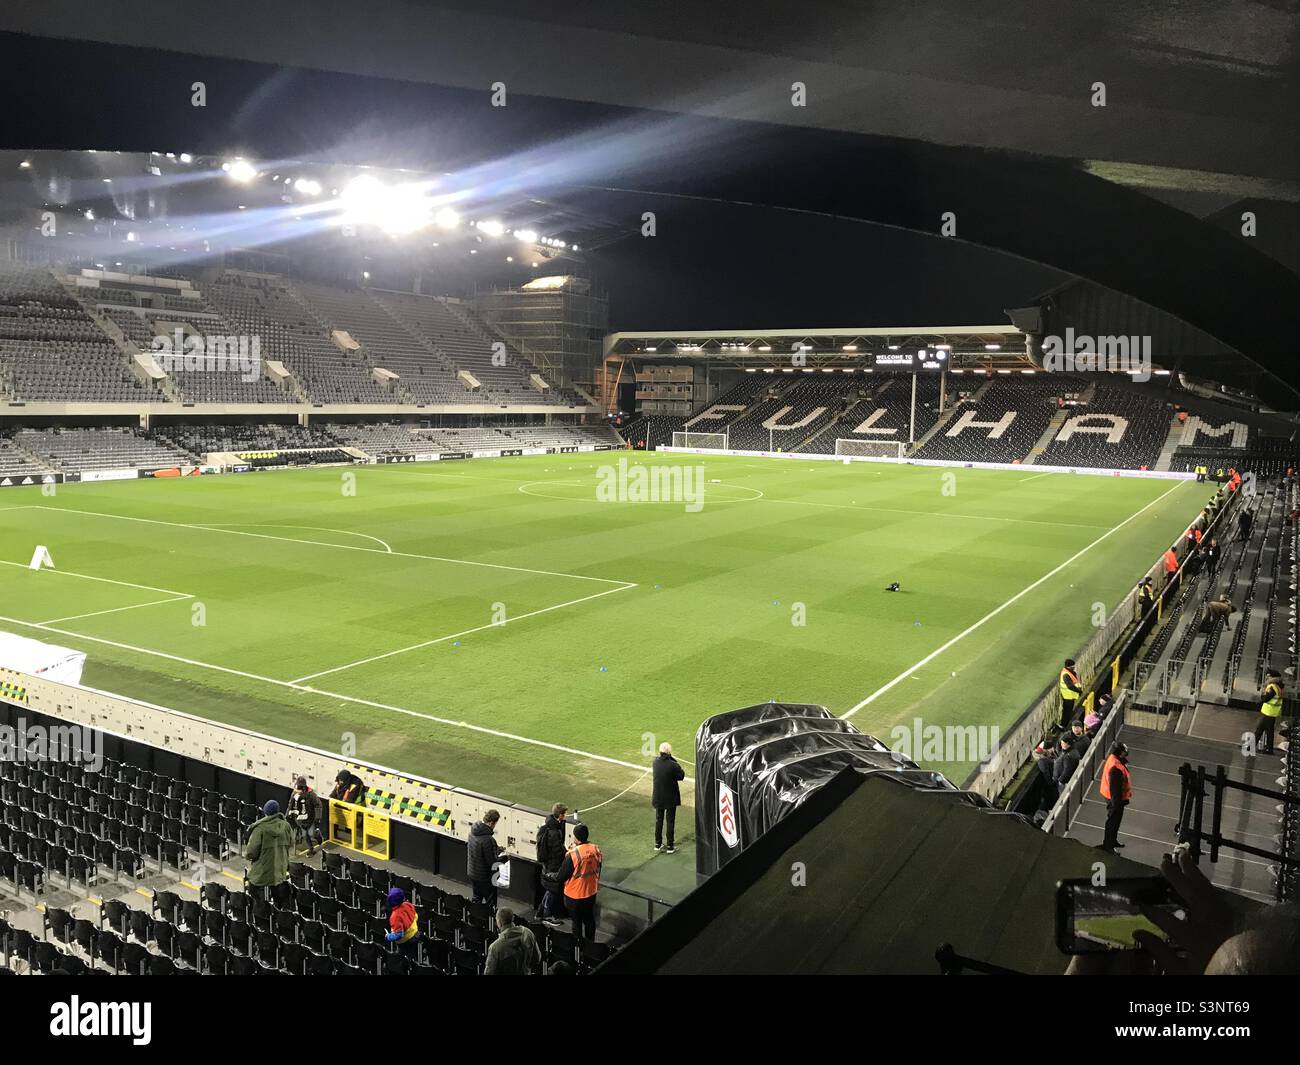 A view at the Craven Cottage stadium of the Fulham FC in London Stock Photo